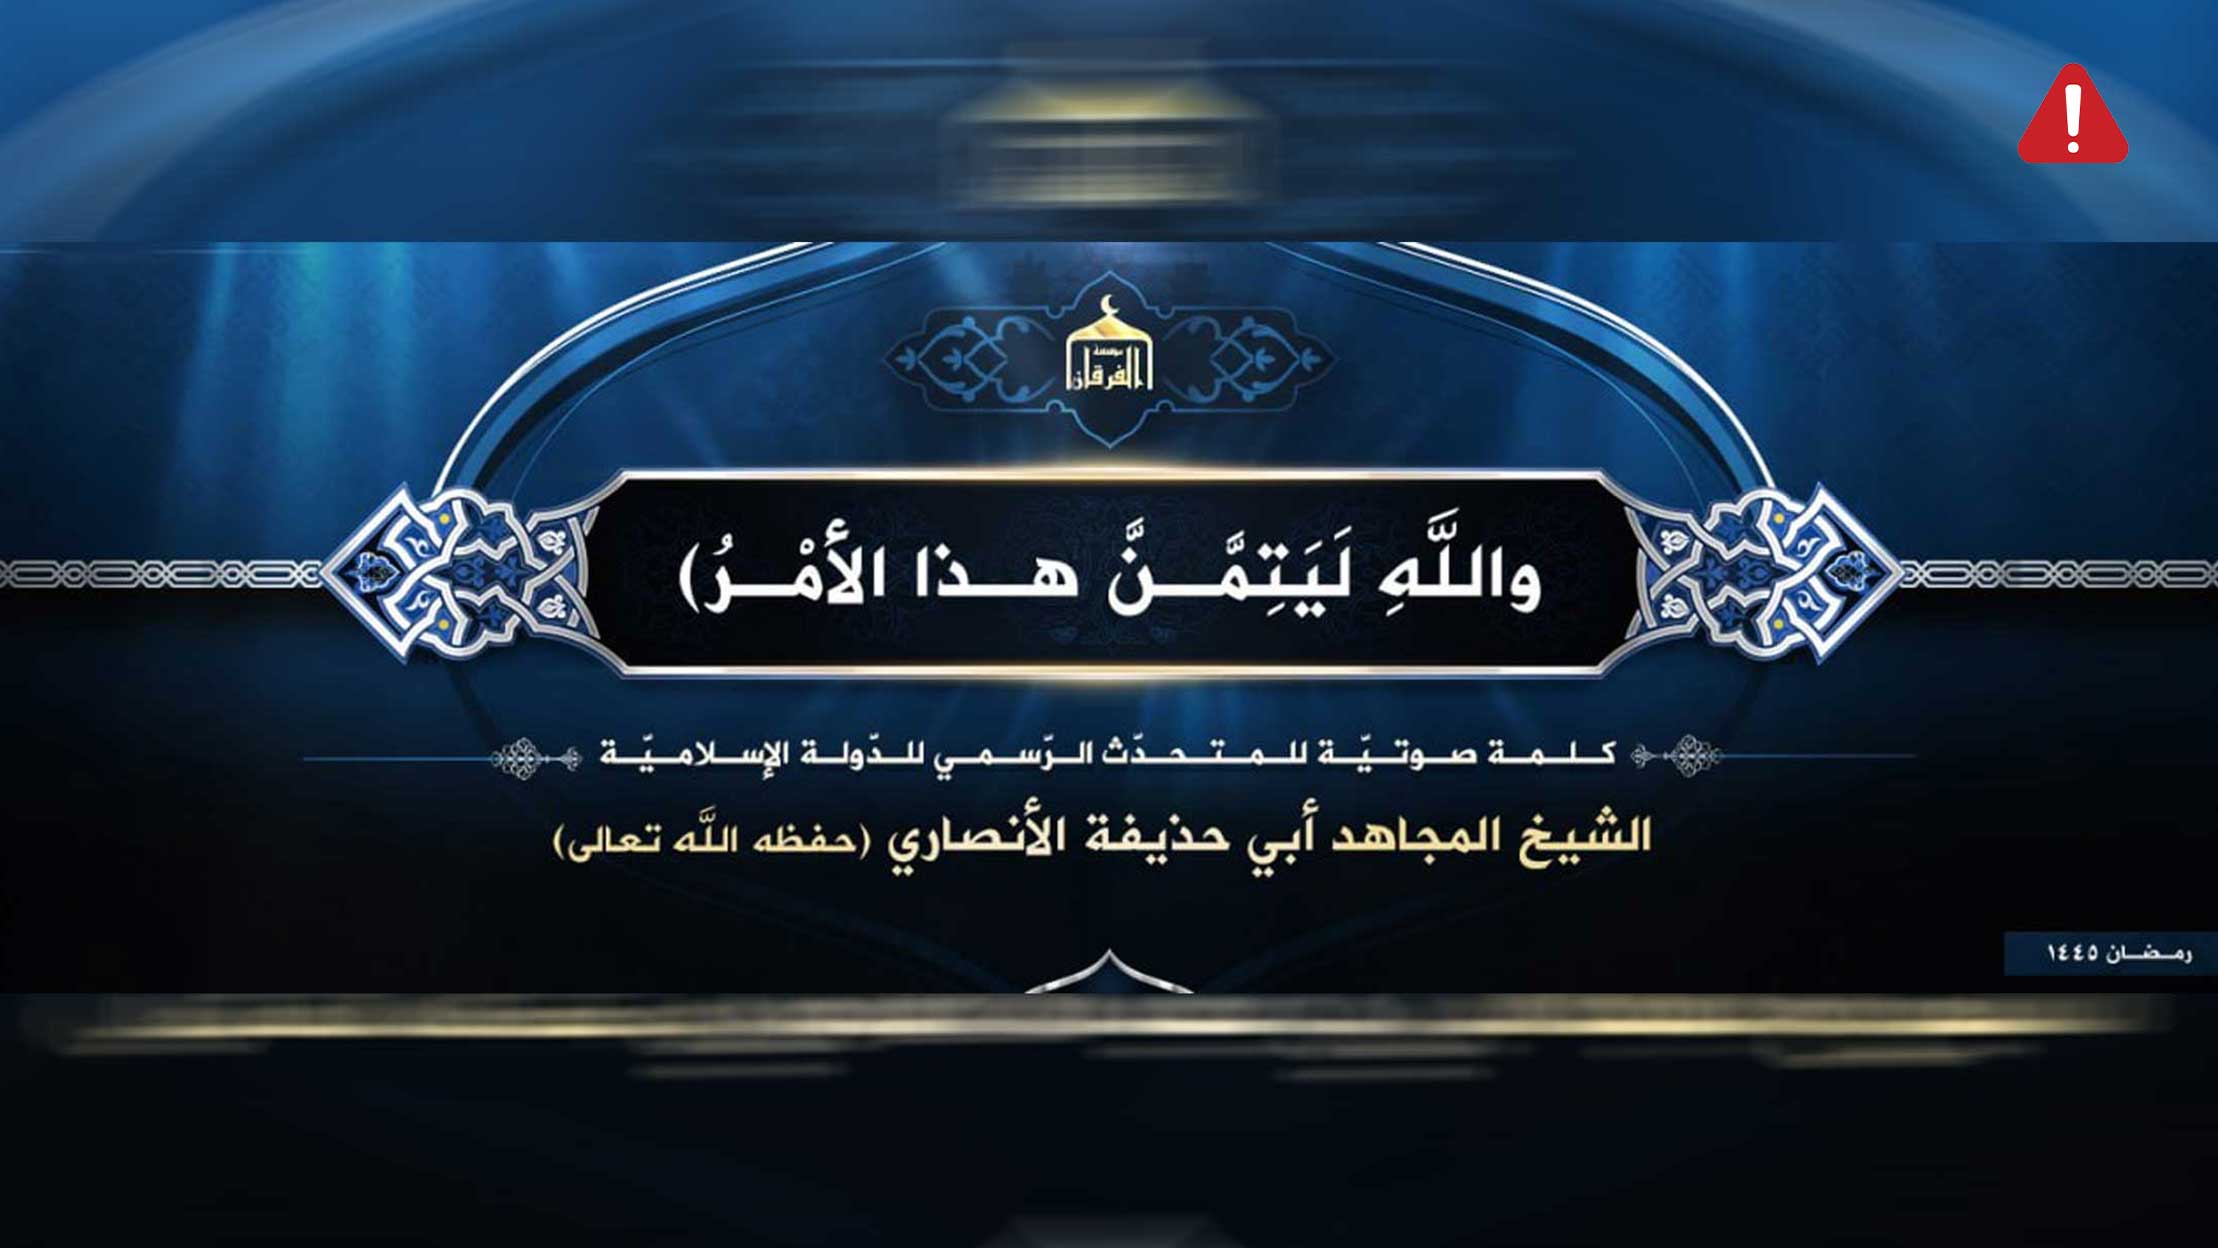 TKD MONITORING: Islamic State Central Publishes Speech from Spokesmam image